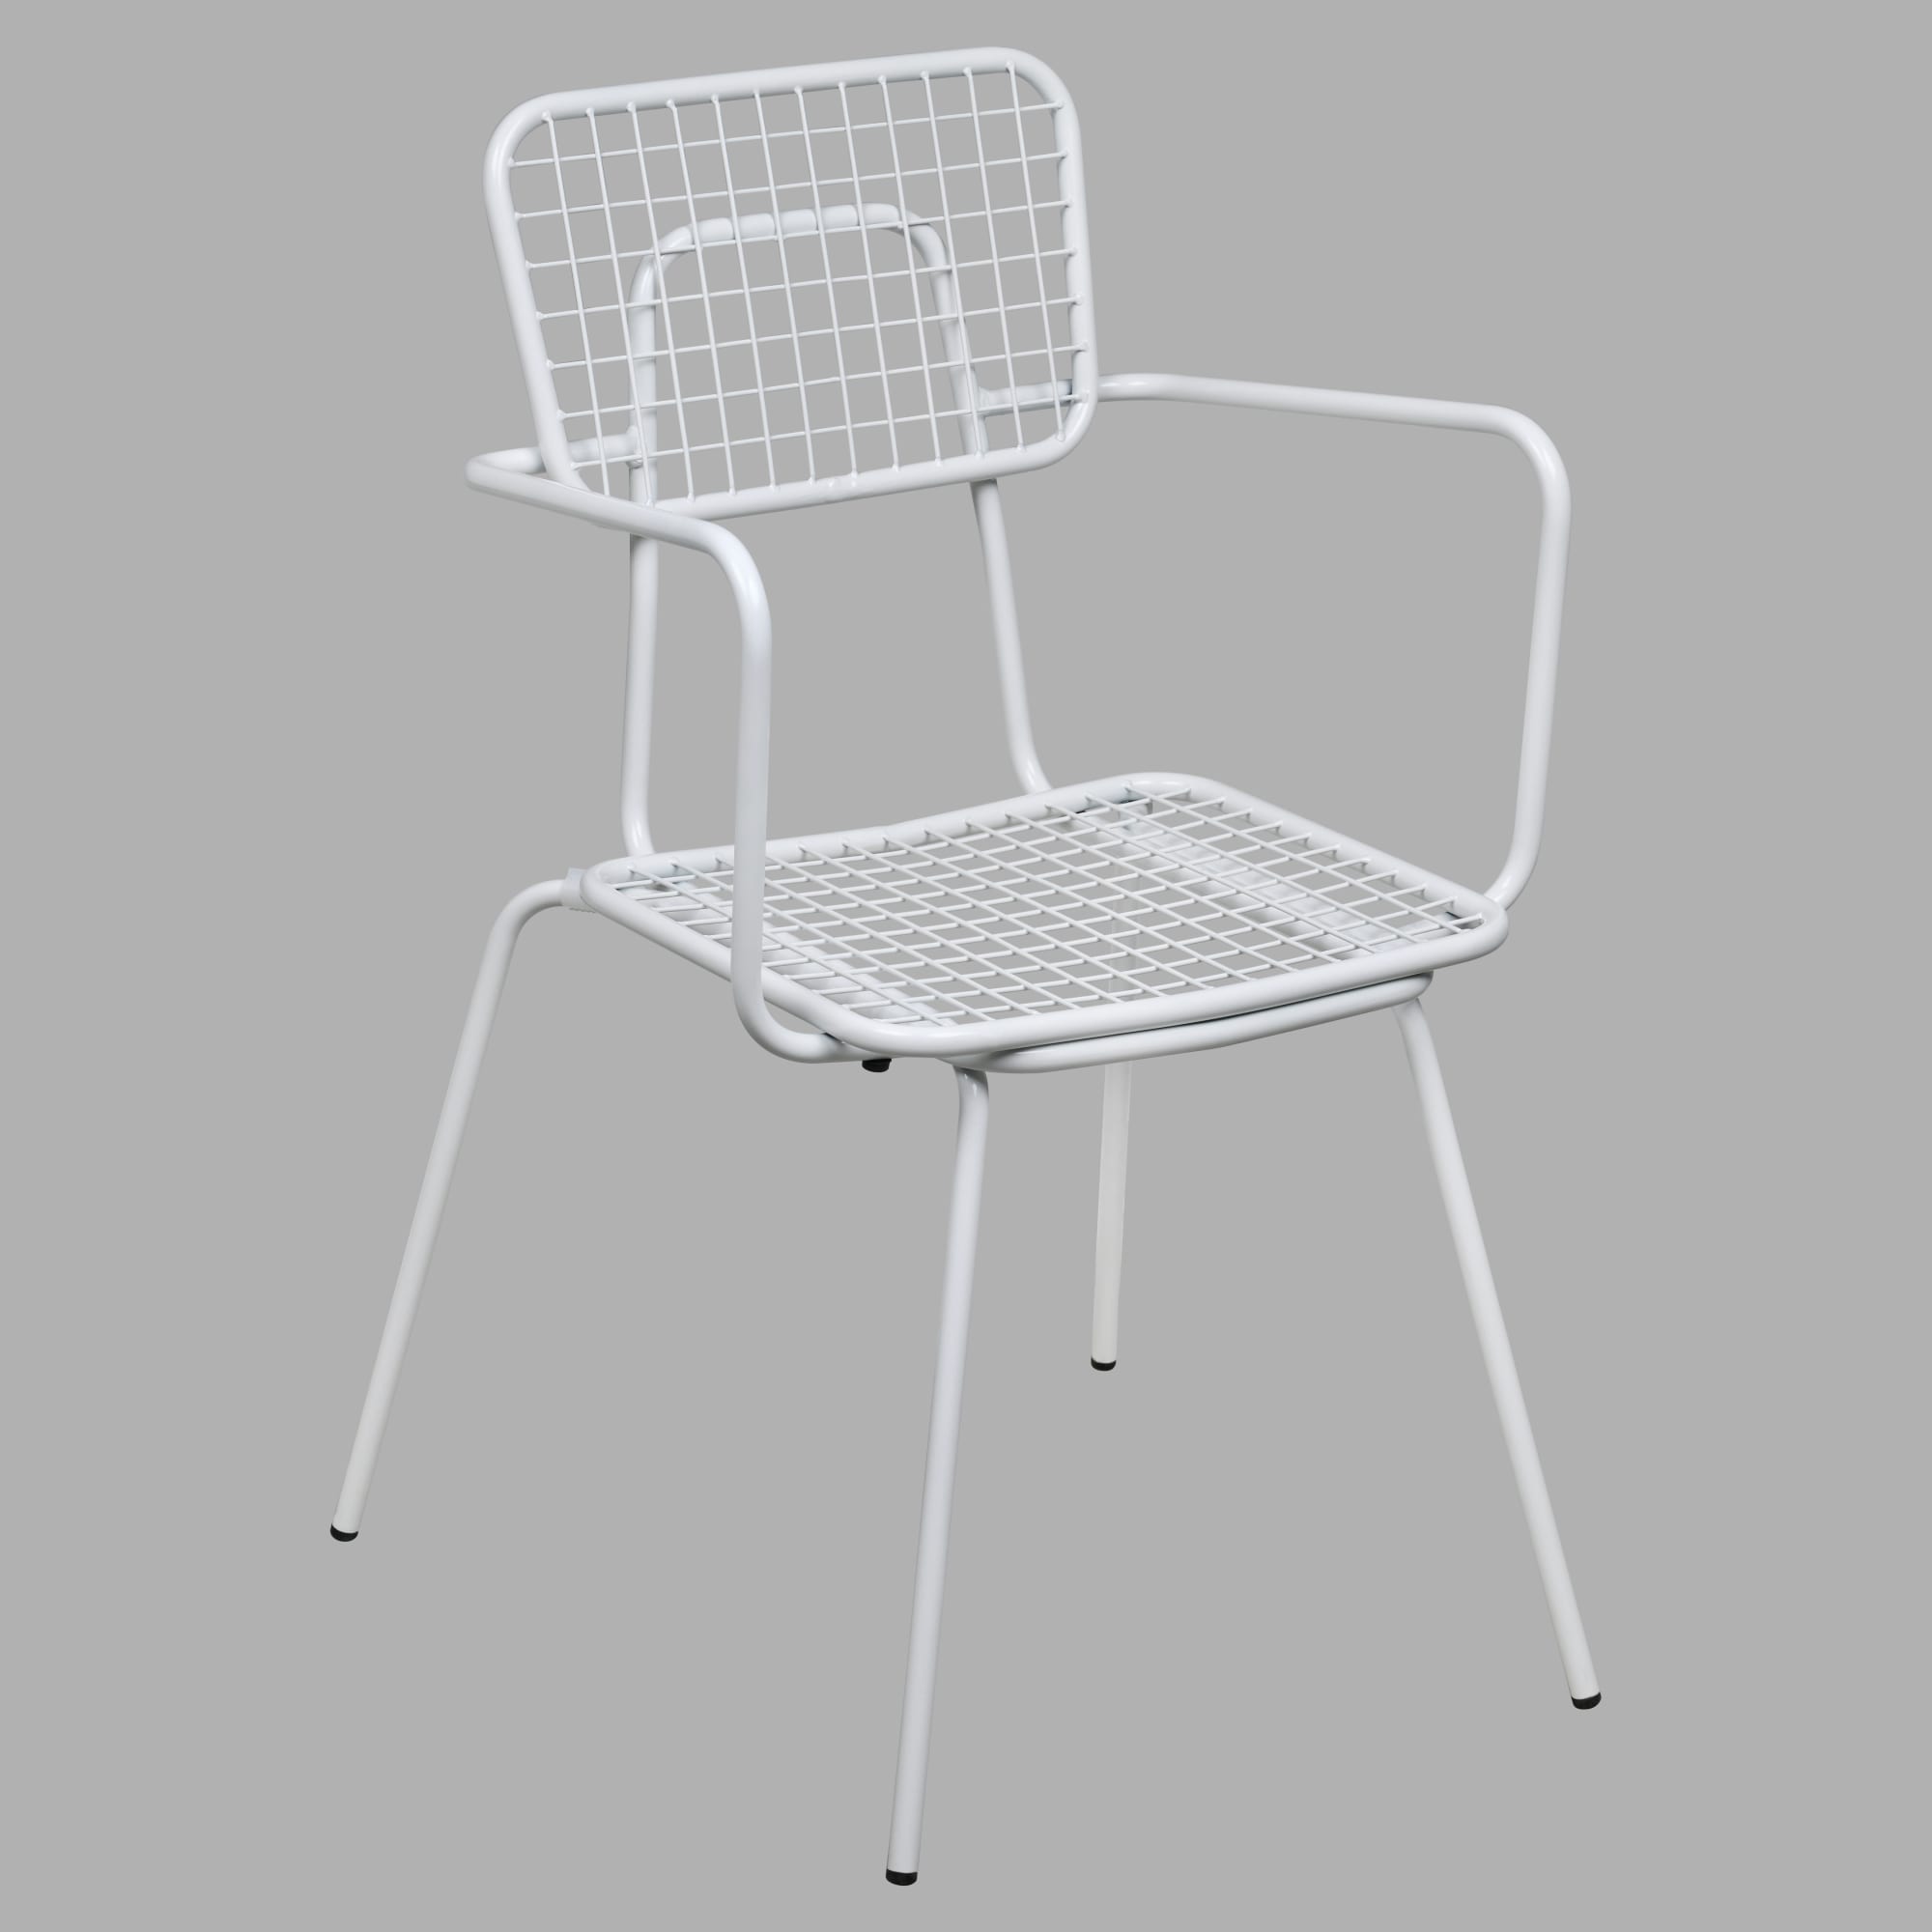 Ollie Patio Arm Chair in White Finish with Ollie Patio Arm Chair in White Finish